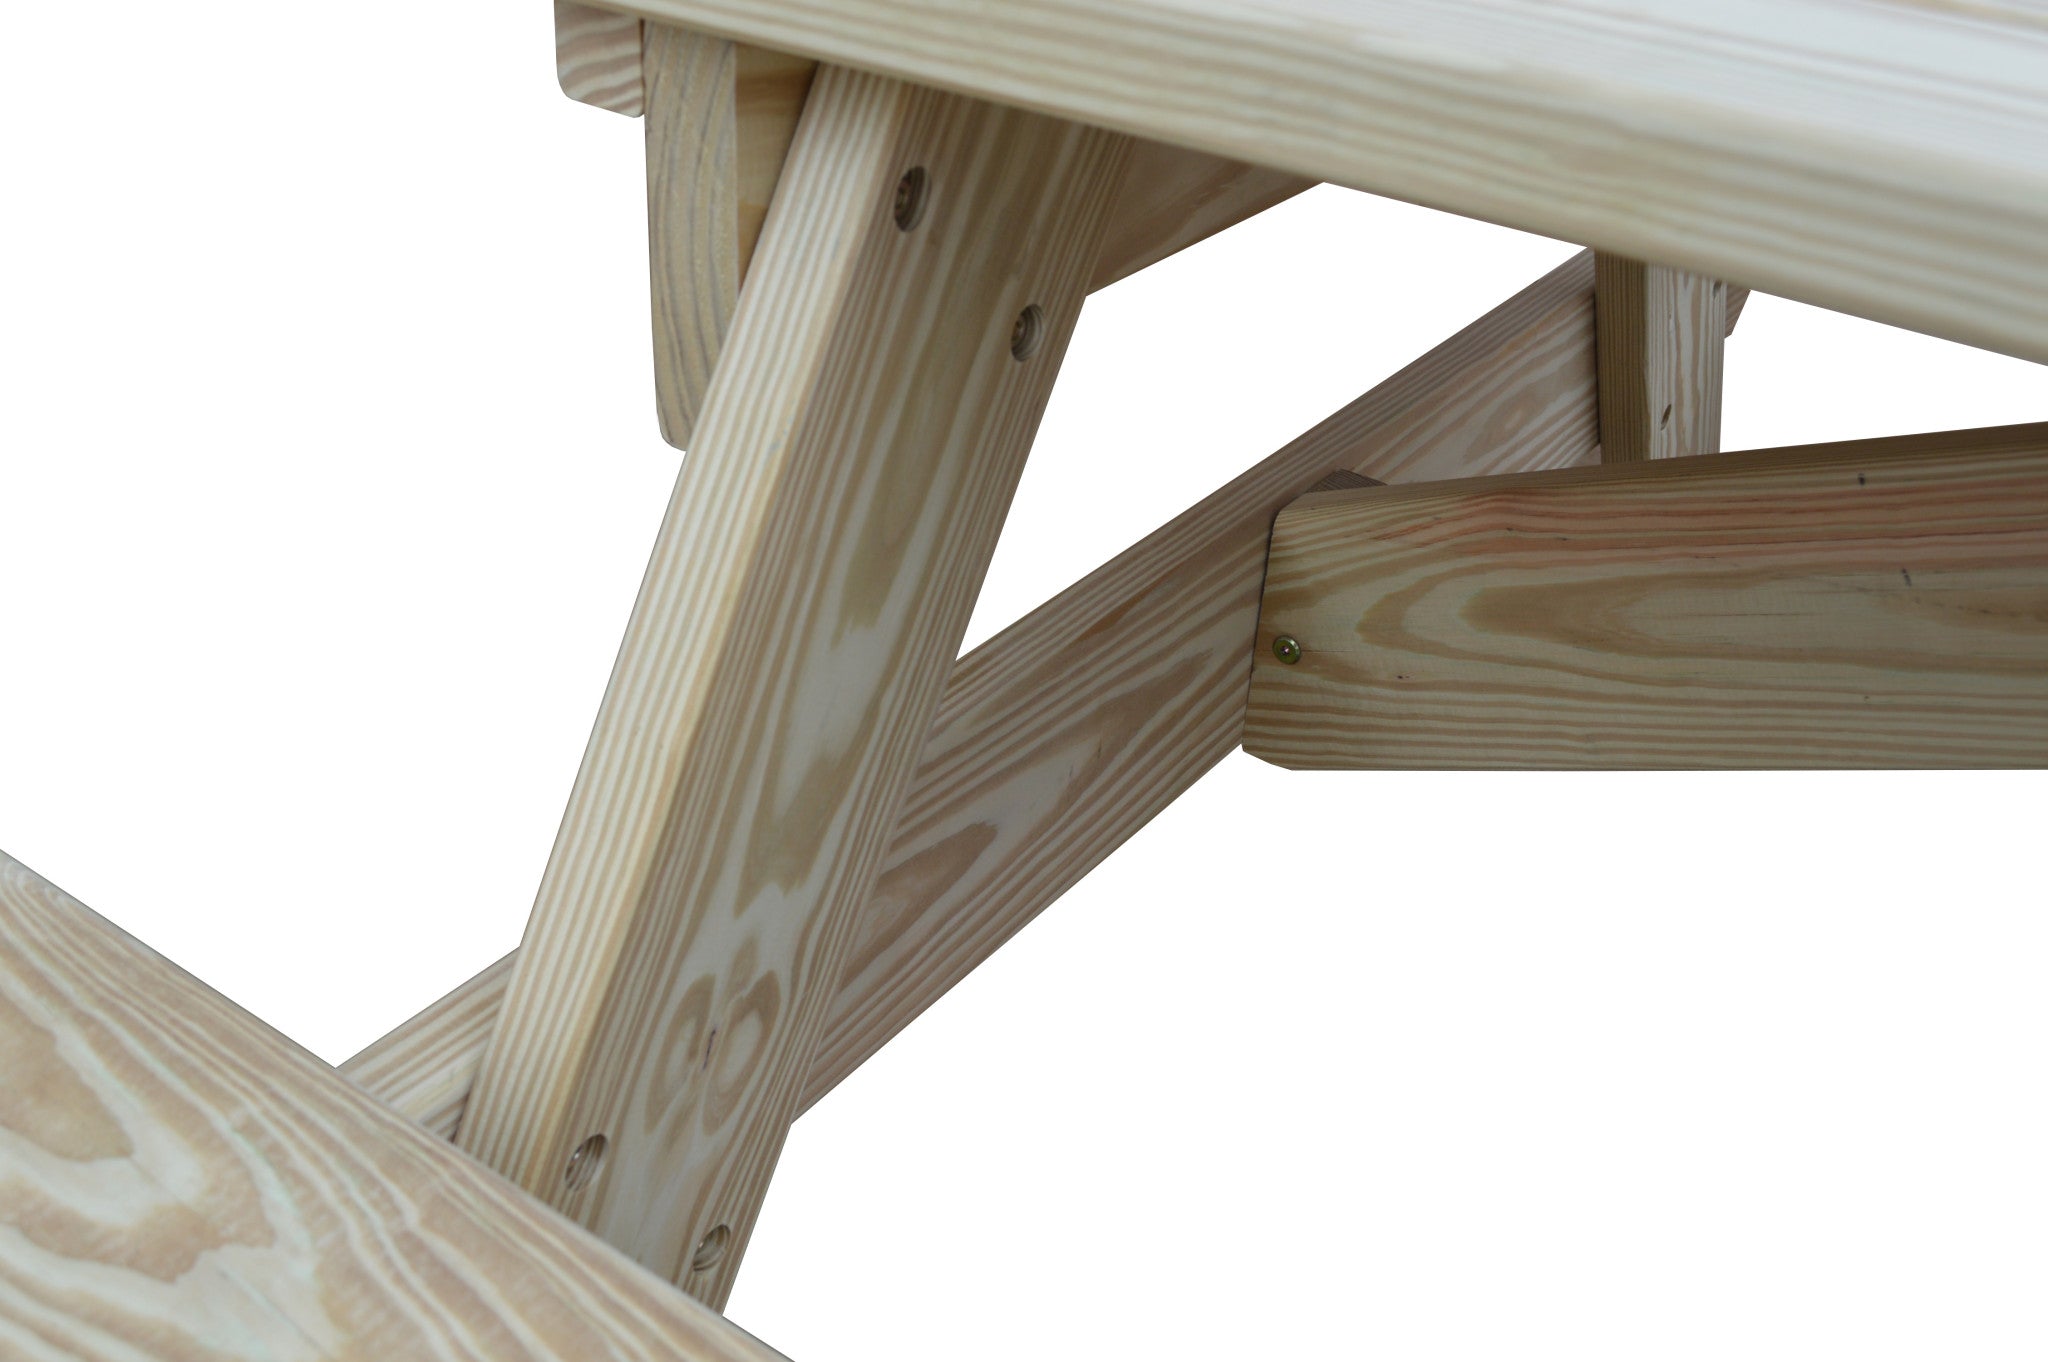 94" Natural Solid Wood Outdoor Picnic Table